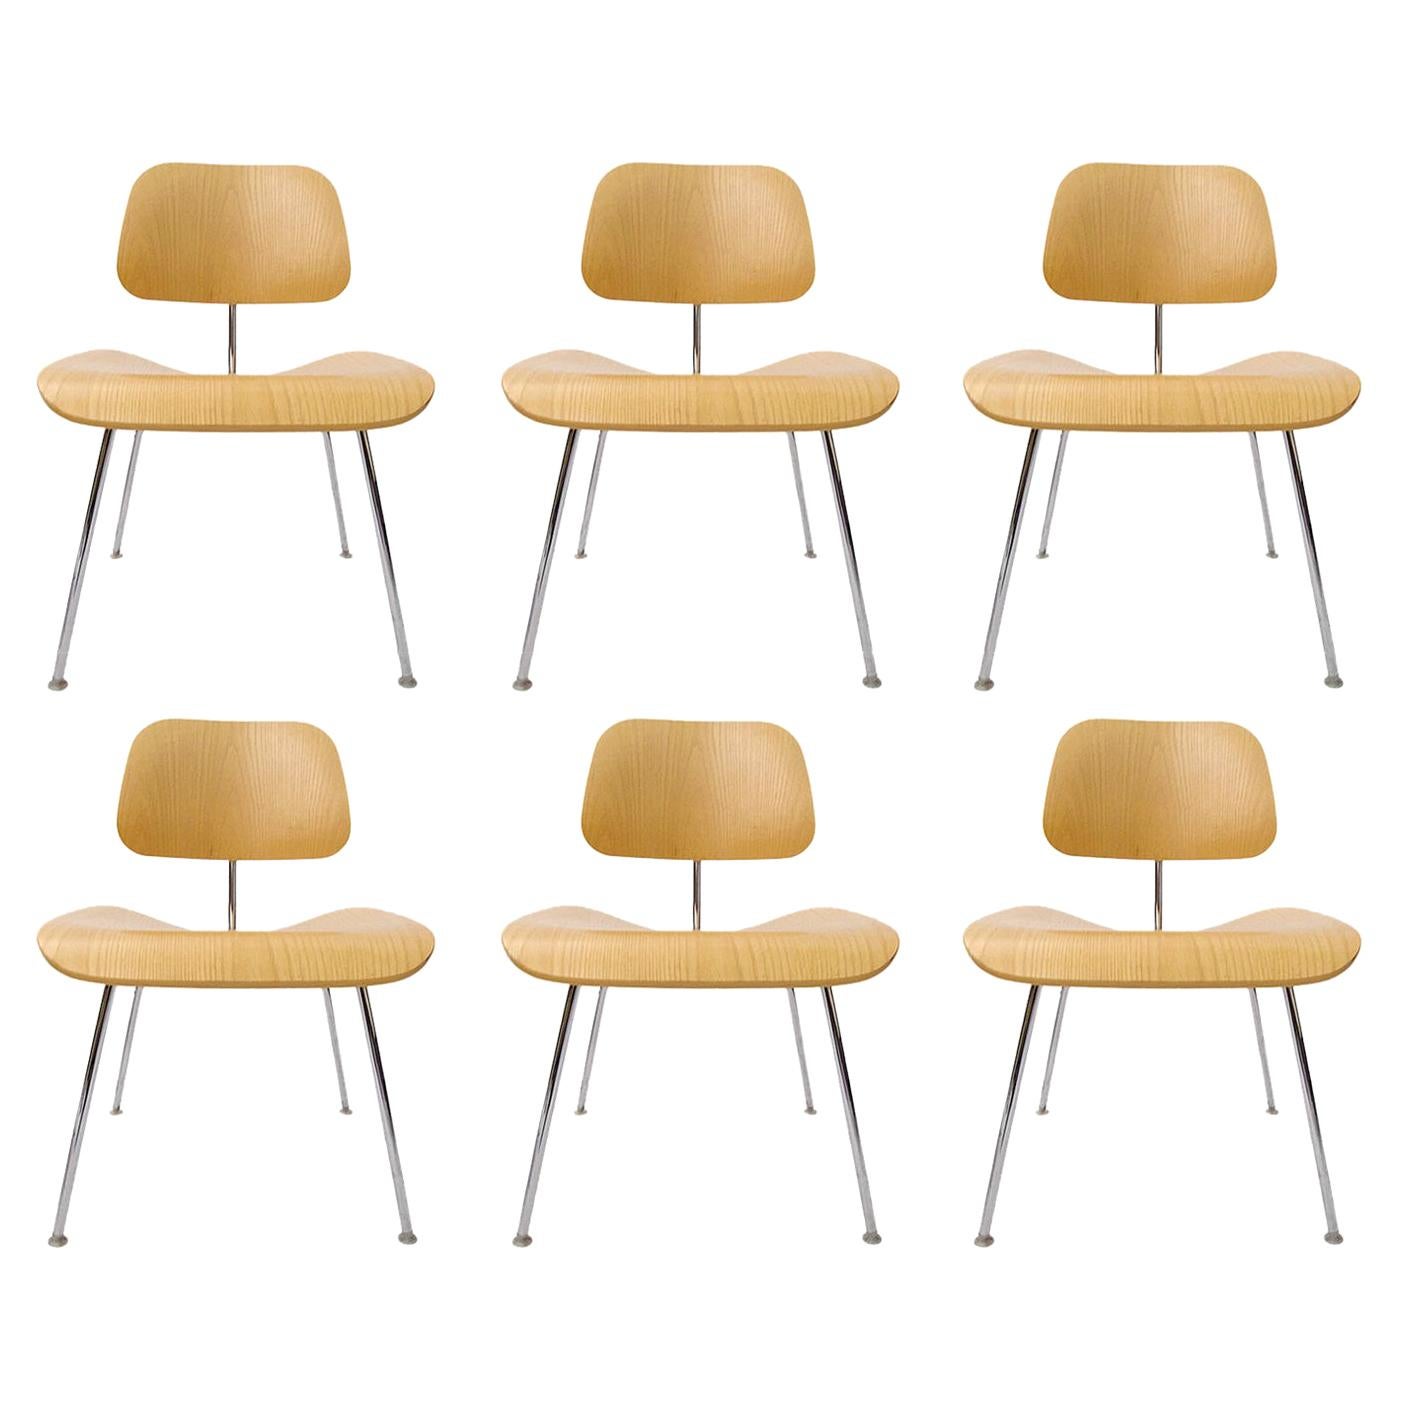 Set of 6 Charles Eames "DCM" Molded Plywood Chairs for Herman Miller White Ash